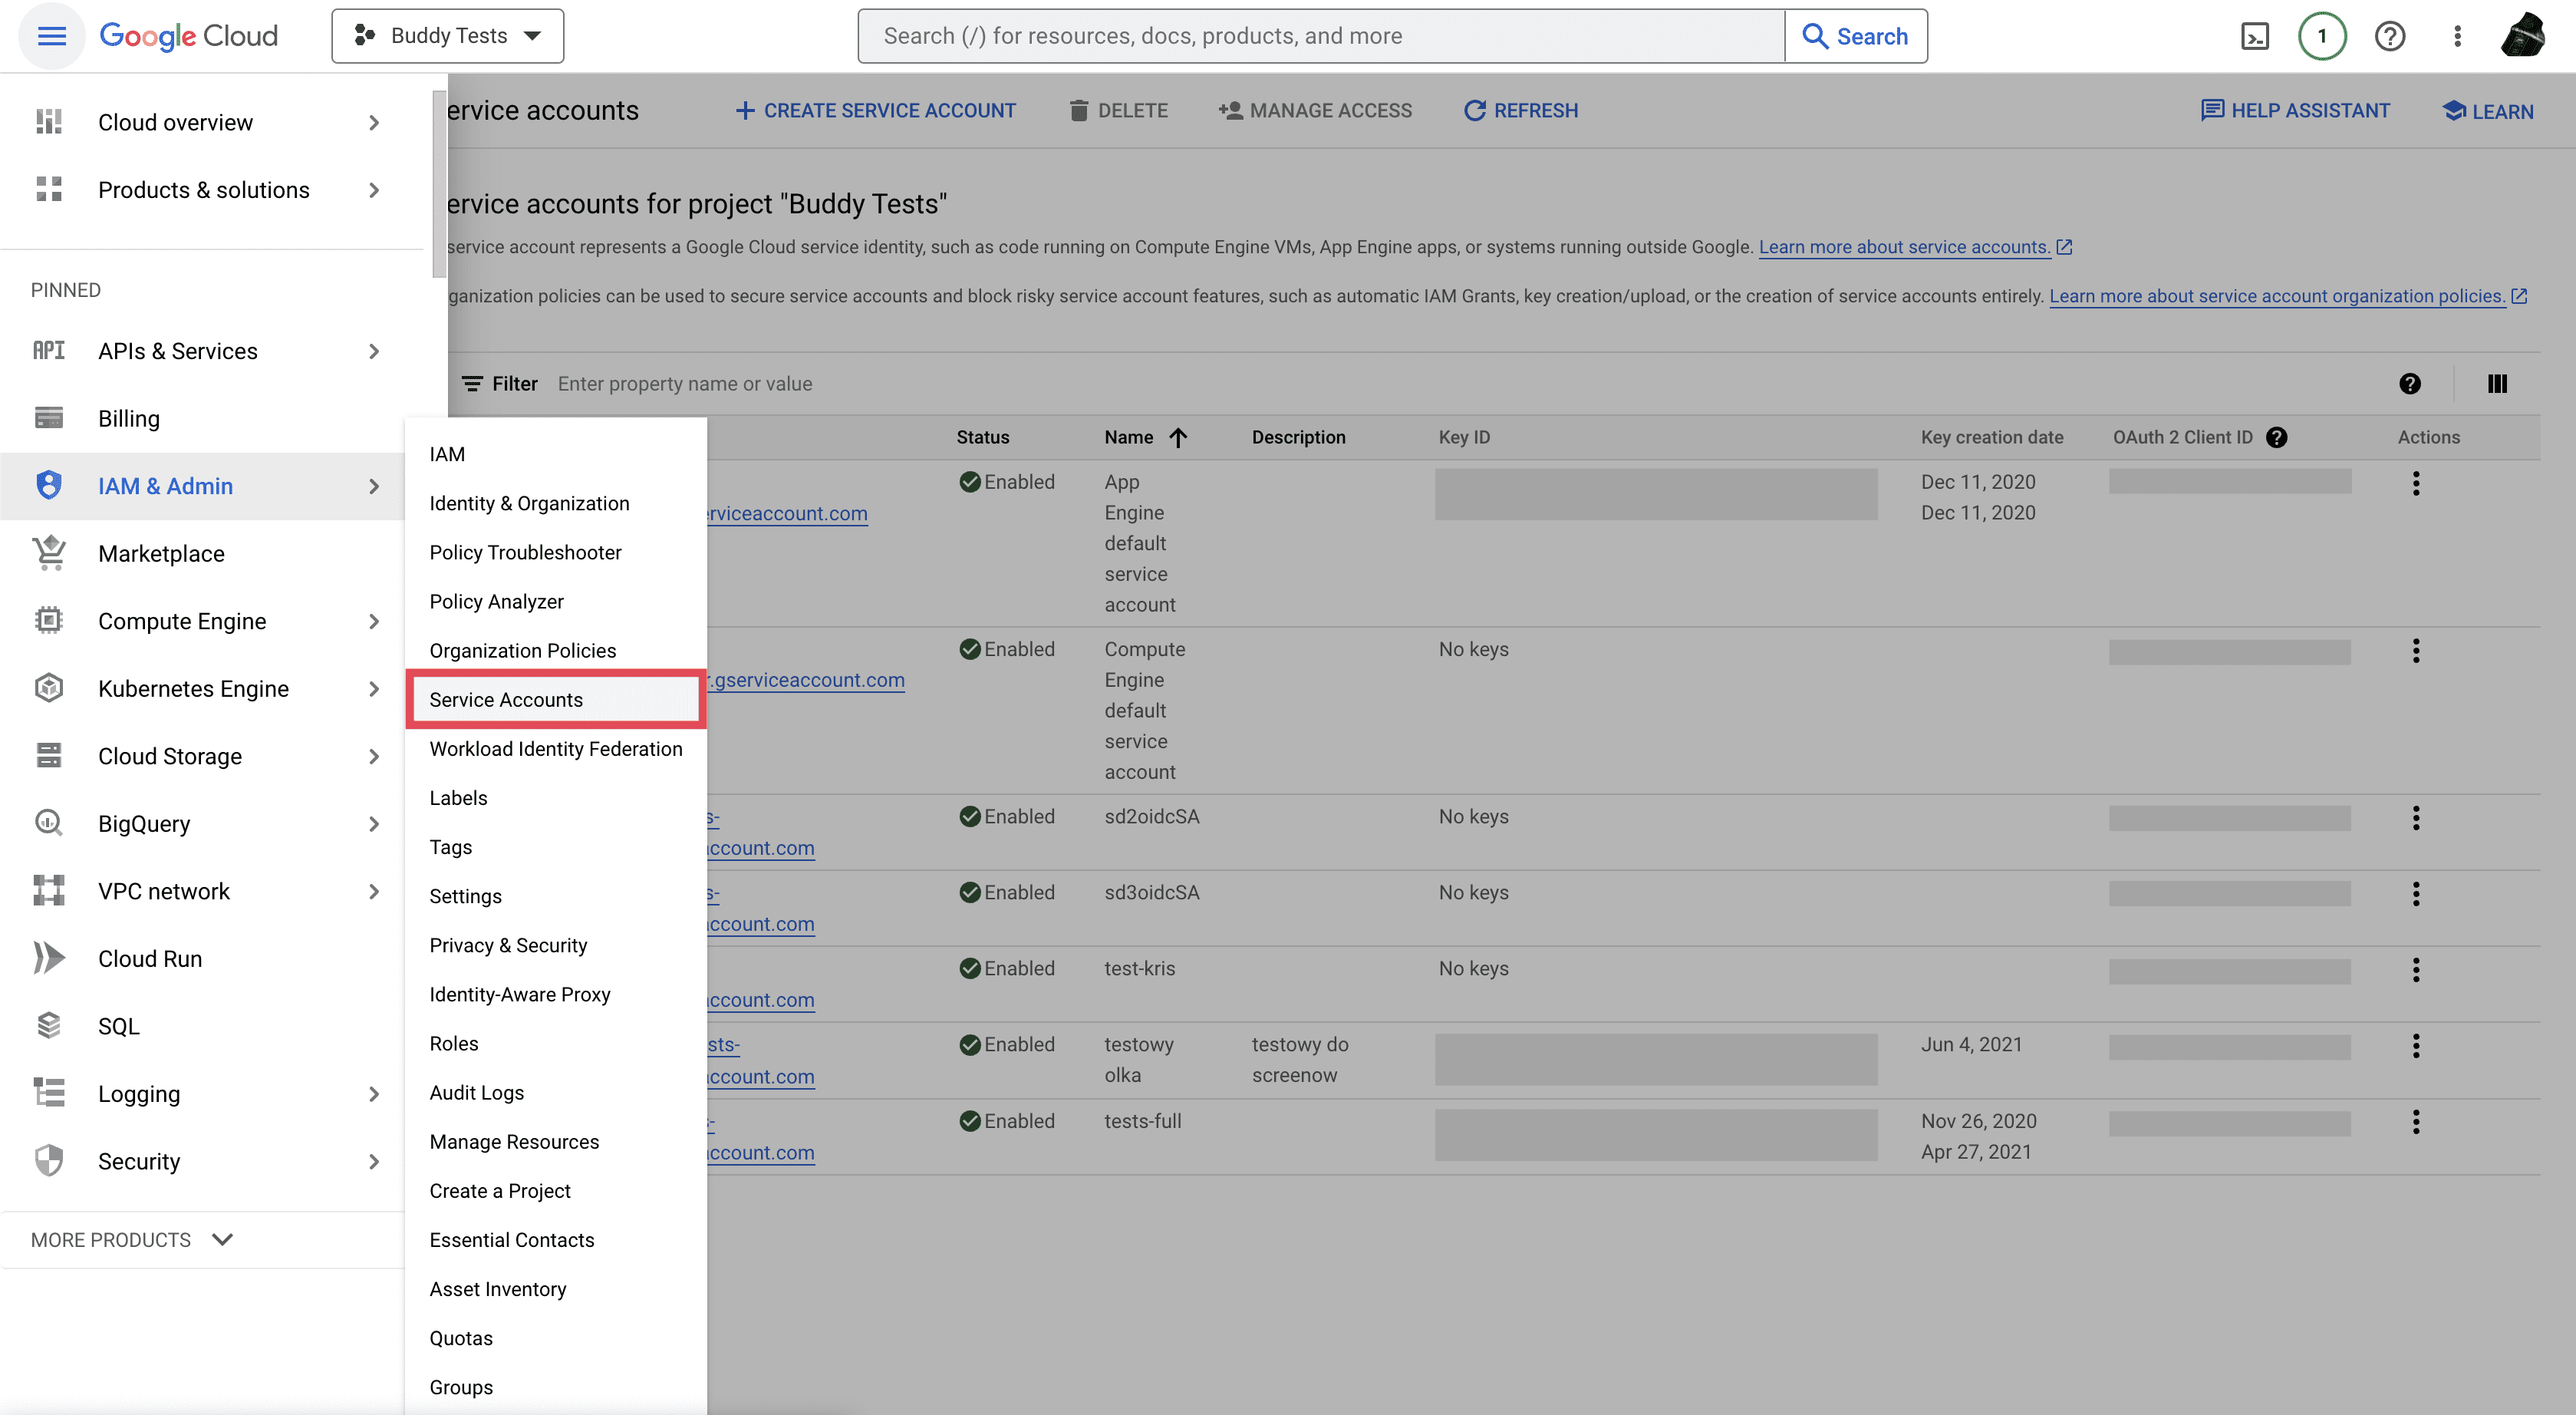 Service accounts in gcloud panel